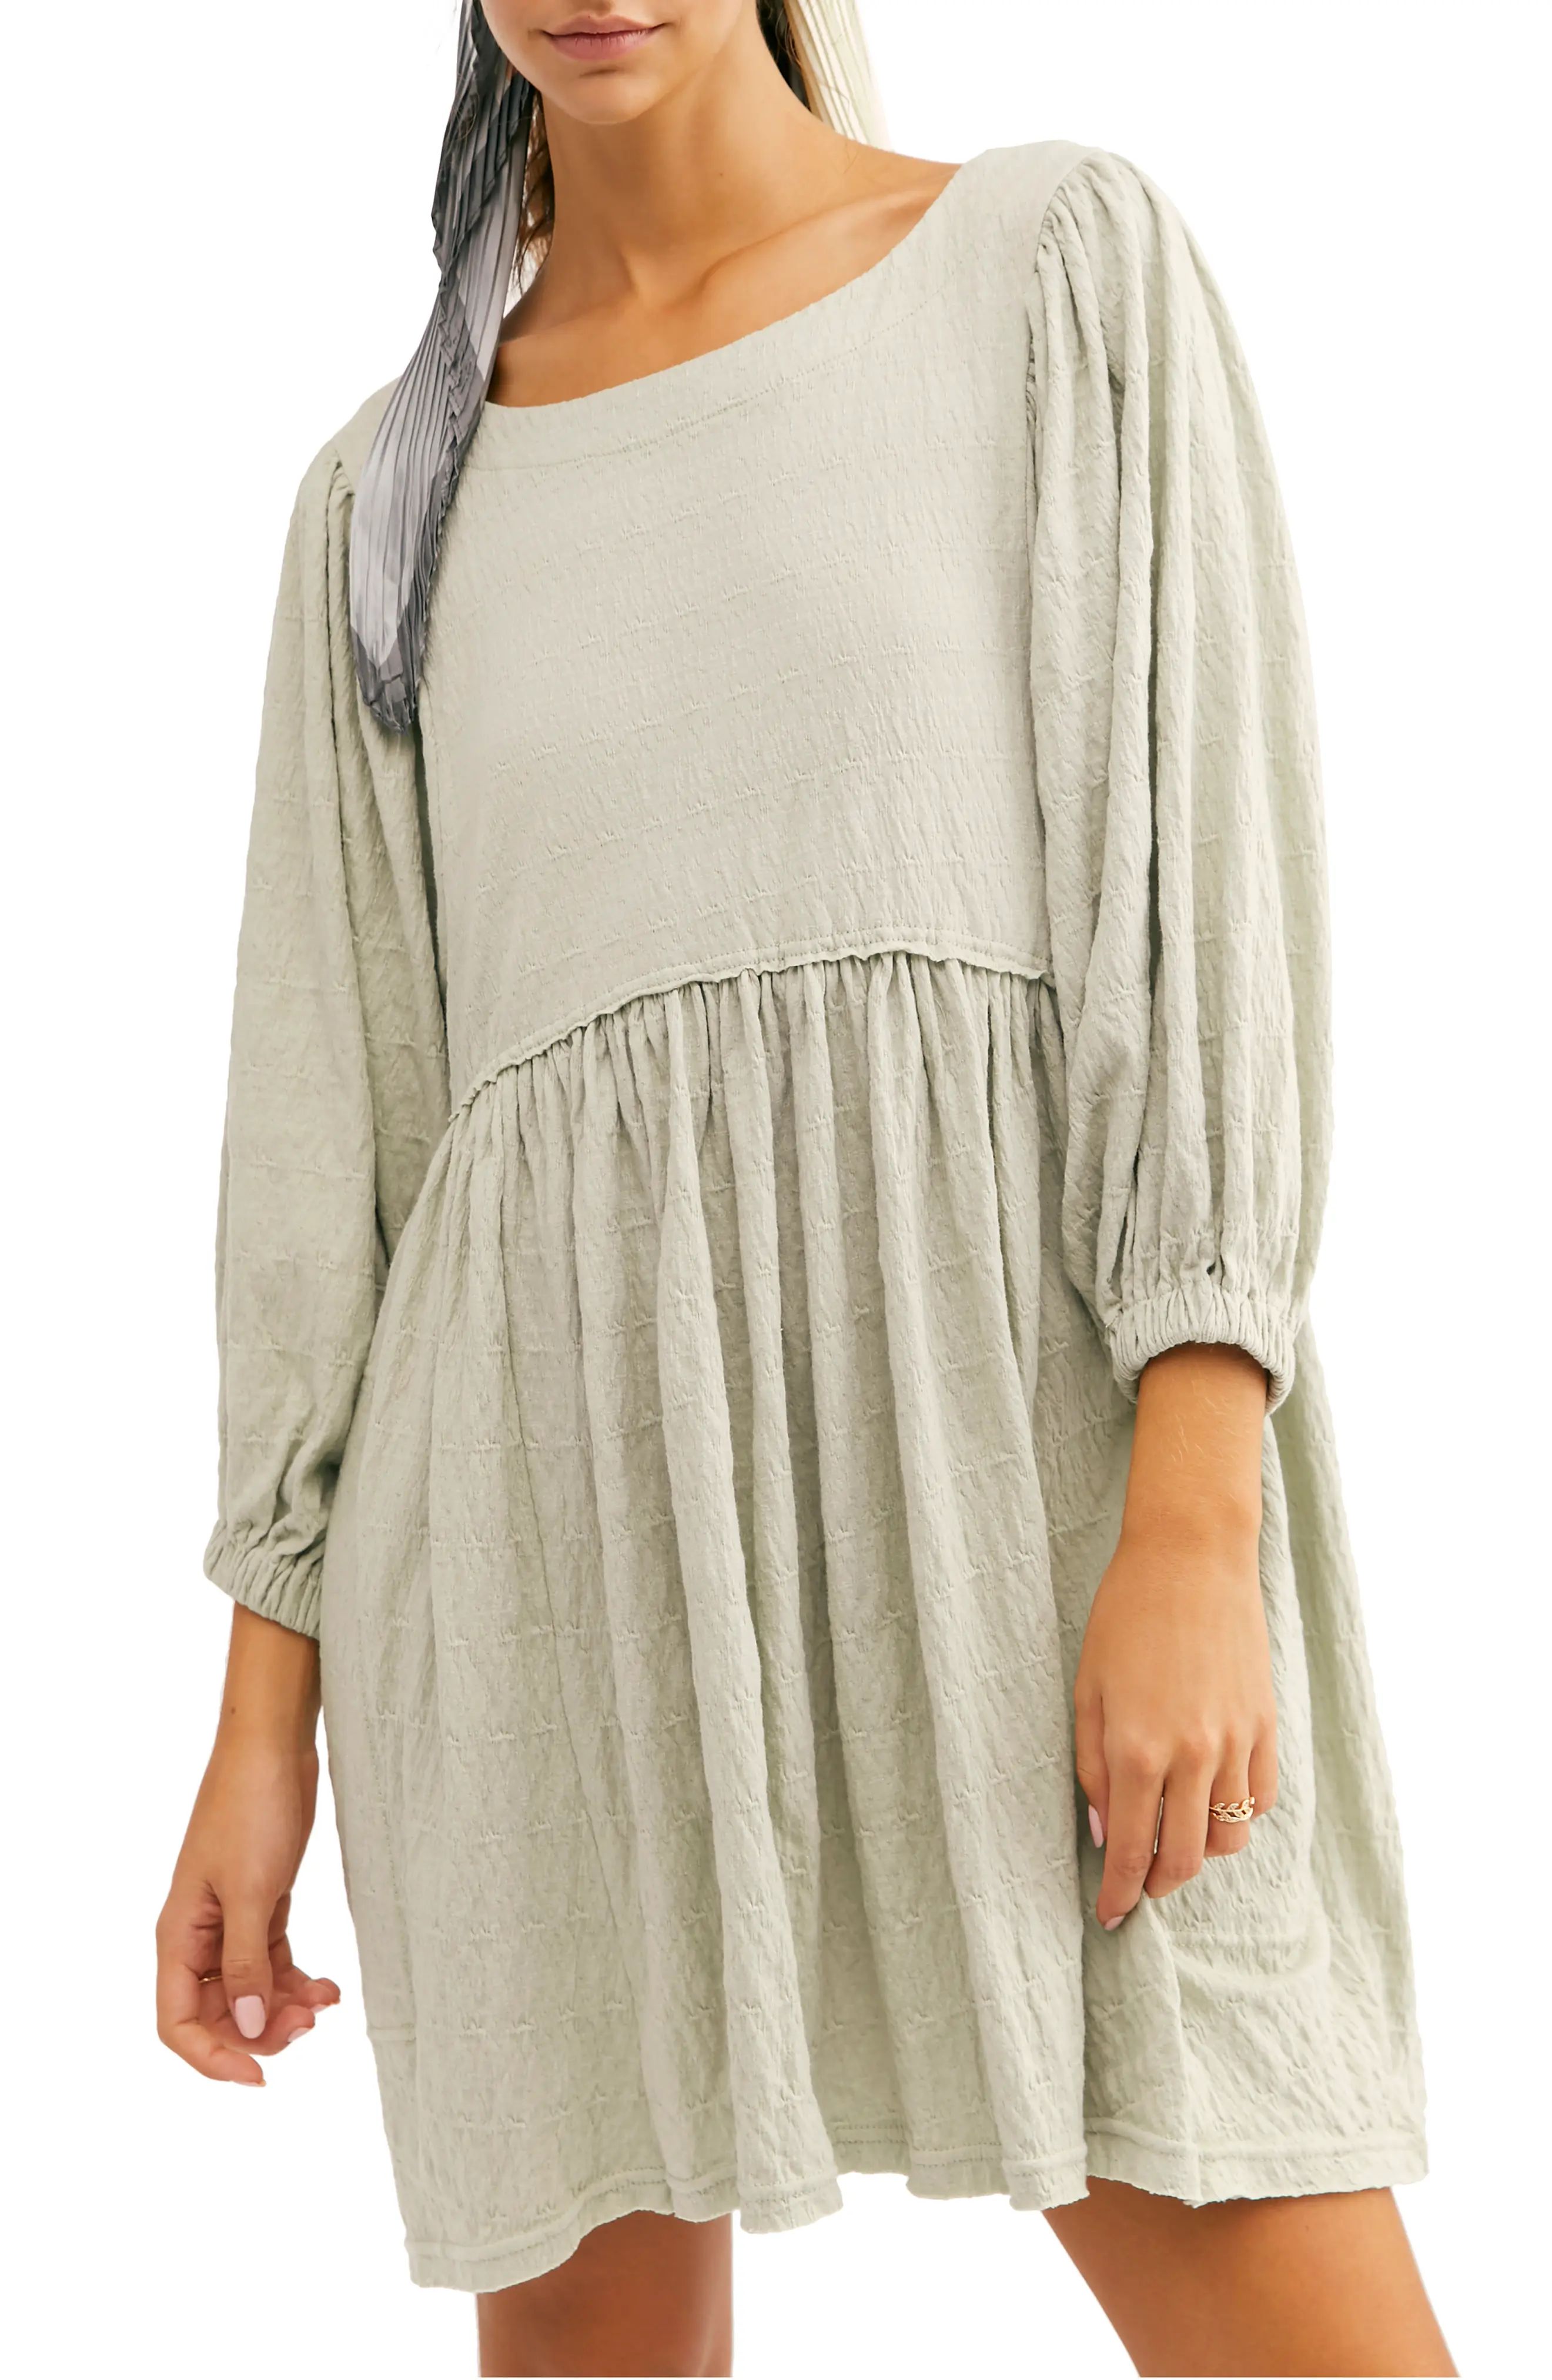 Women's Endless Summer By Free People Get Obsessed Babydoll Tunic Dress, Size Medium - Green | Nordstrom